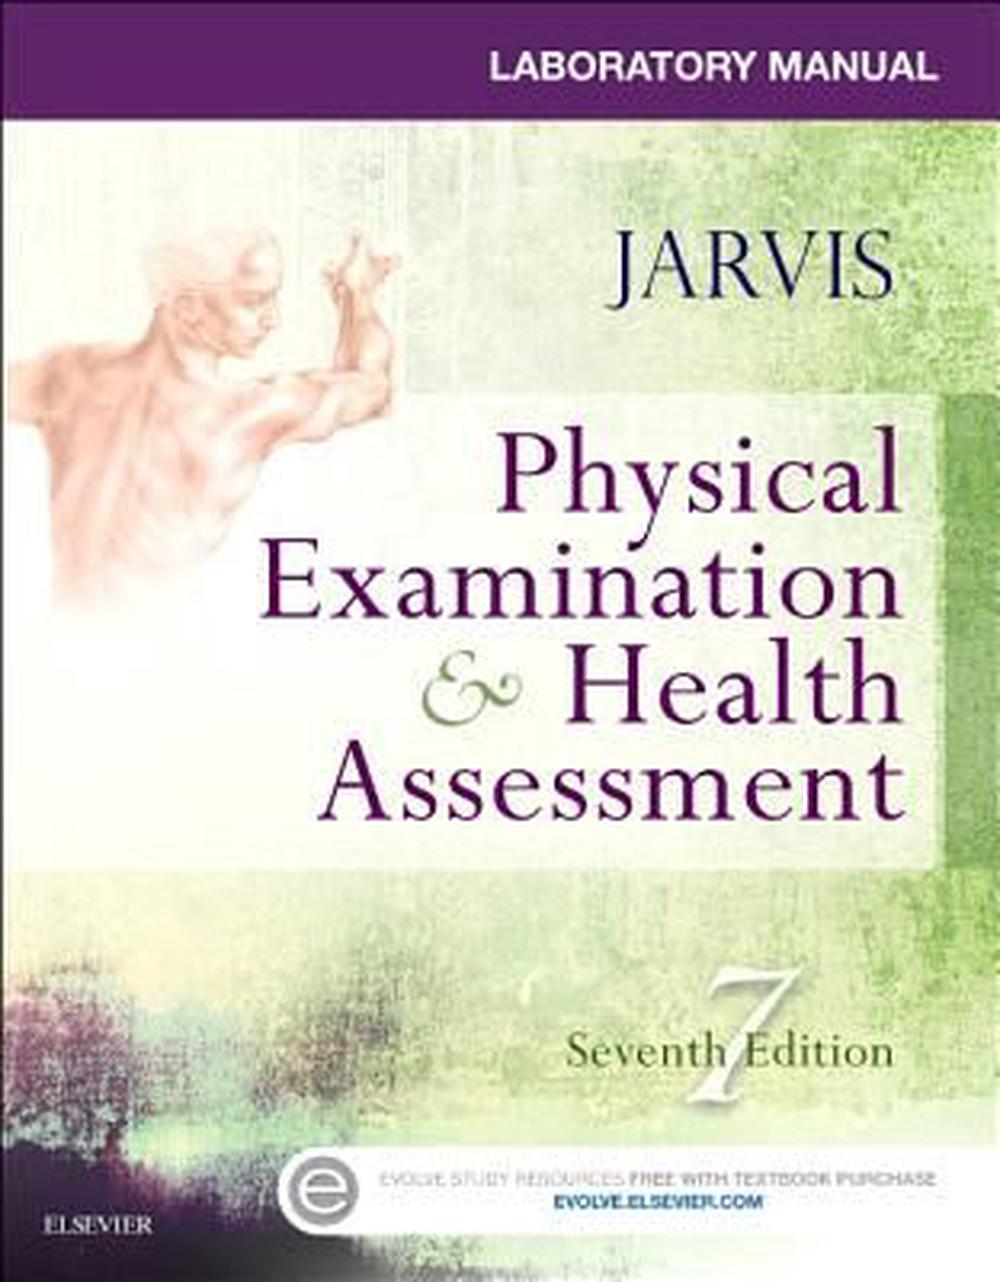 Laboratory Manual for Physical Examination & Health Assessment by Carolyn Jarvis, Paperback